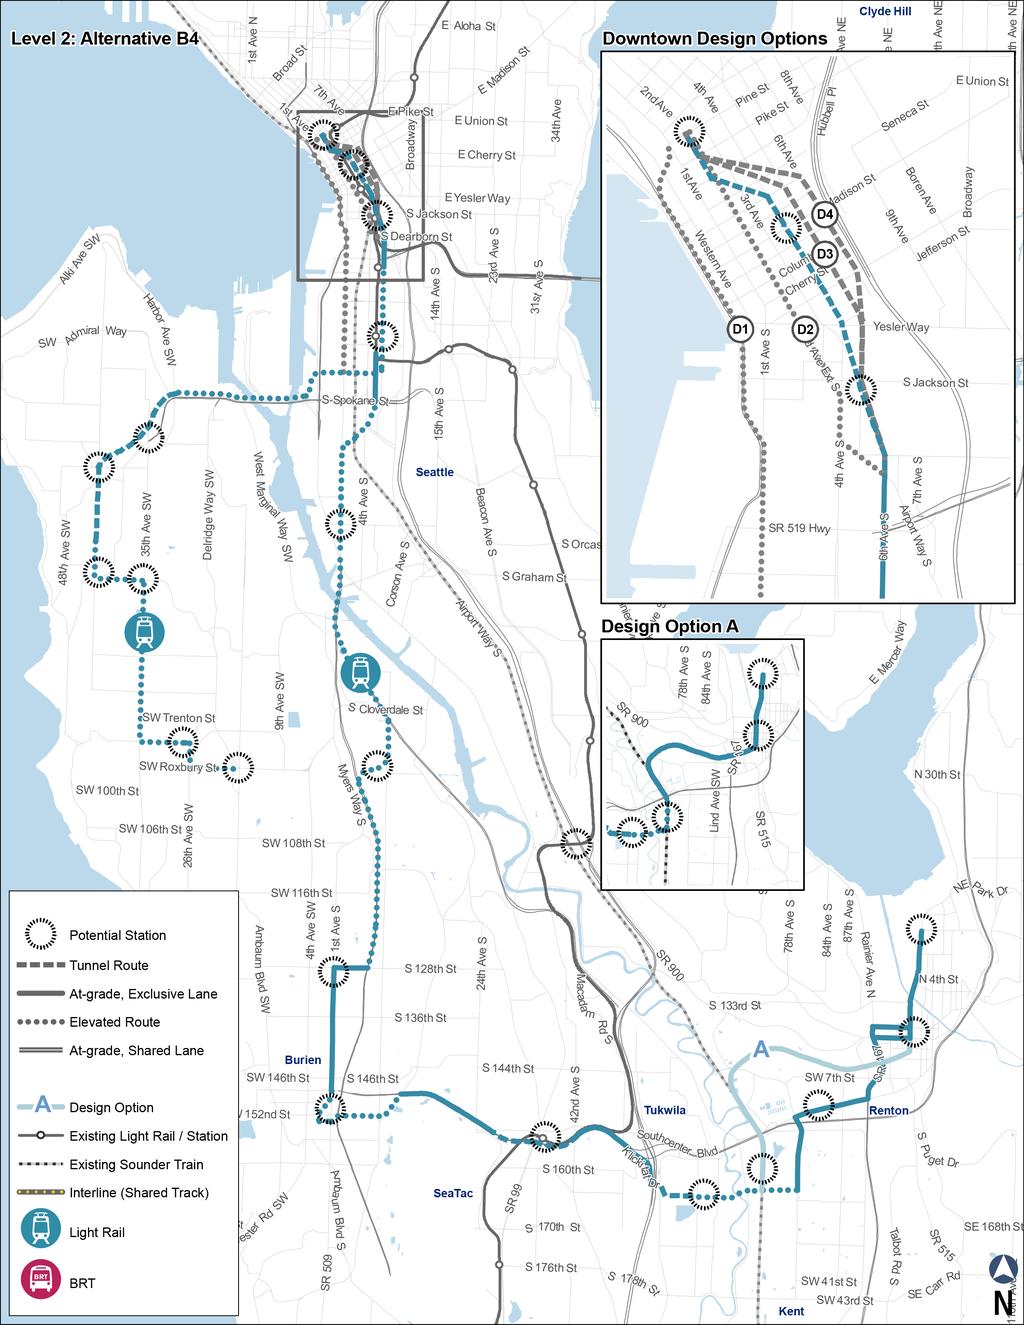 South King County High Capacity Transit Corridor Report Alternative B4 LRT Tunnel West Seattle Alternative B4 is an LRT alignment that travels via a mix of at-grade, elevated and tunnel profiles.